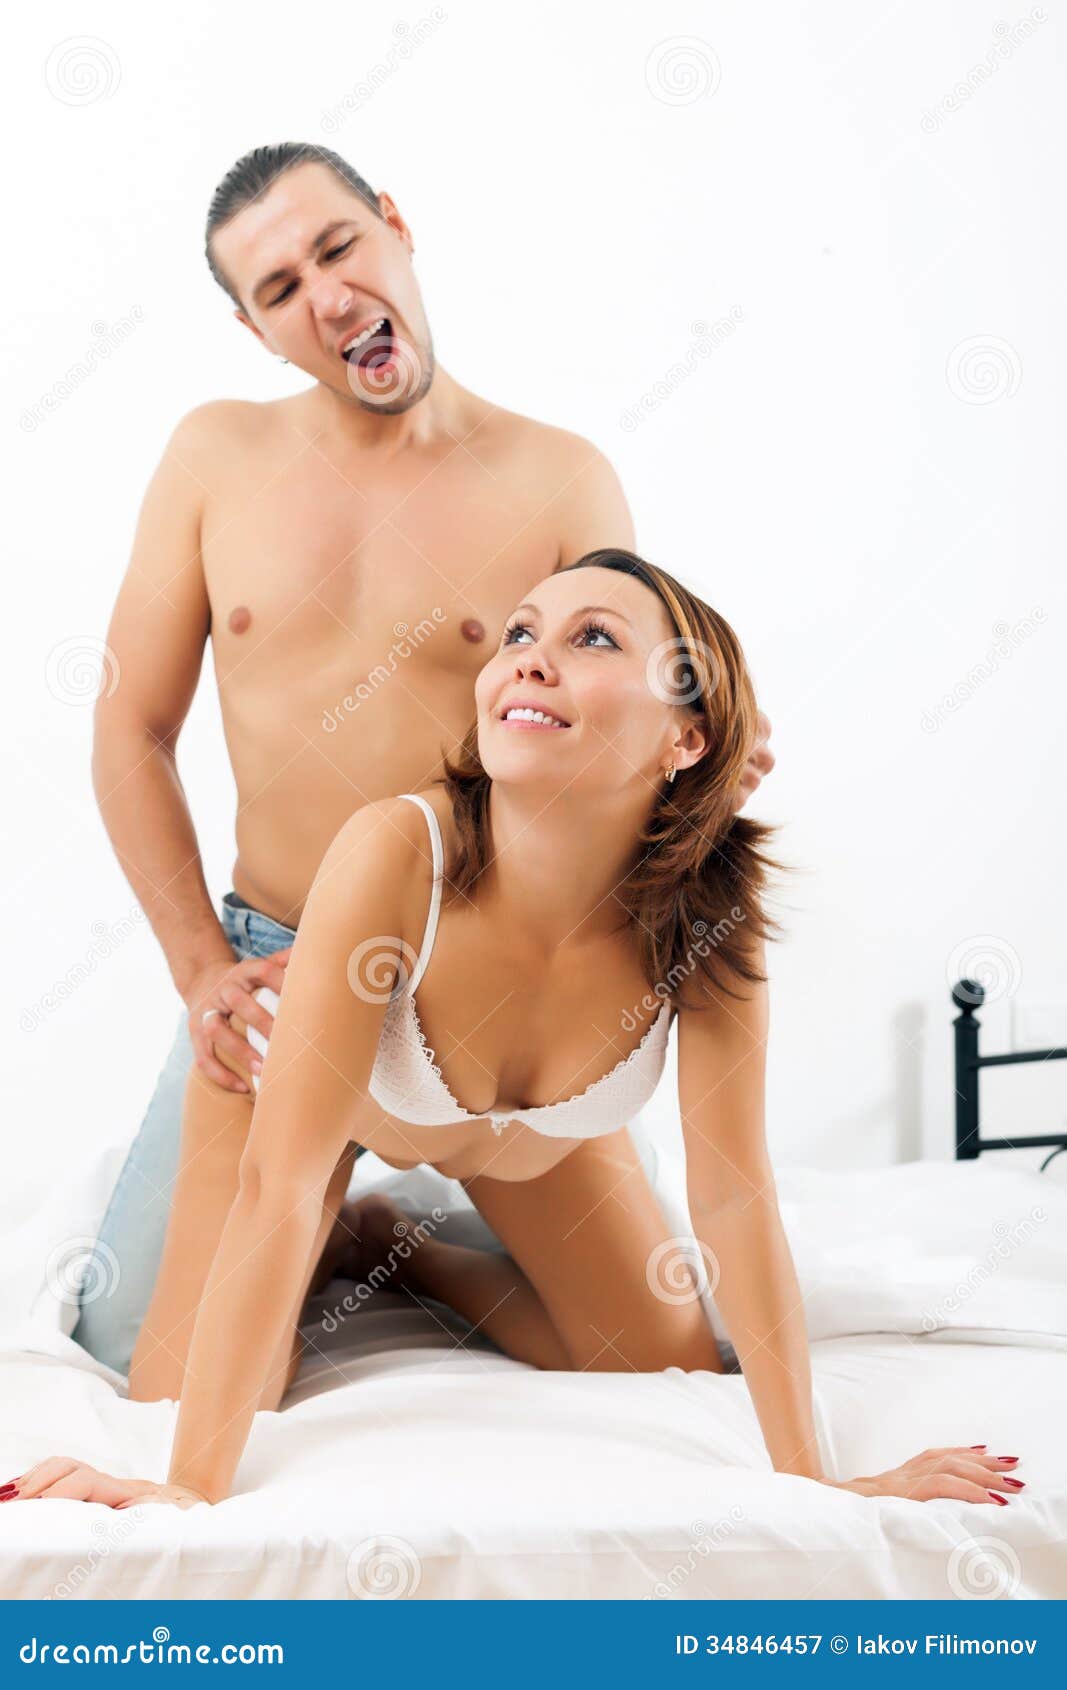 Emotional Guy and Girl Having Sex Stock Image pic